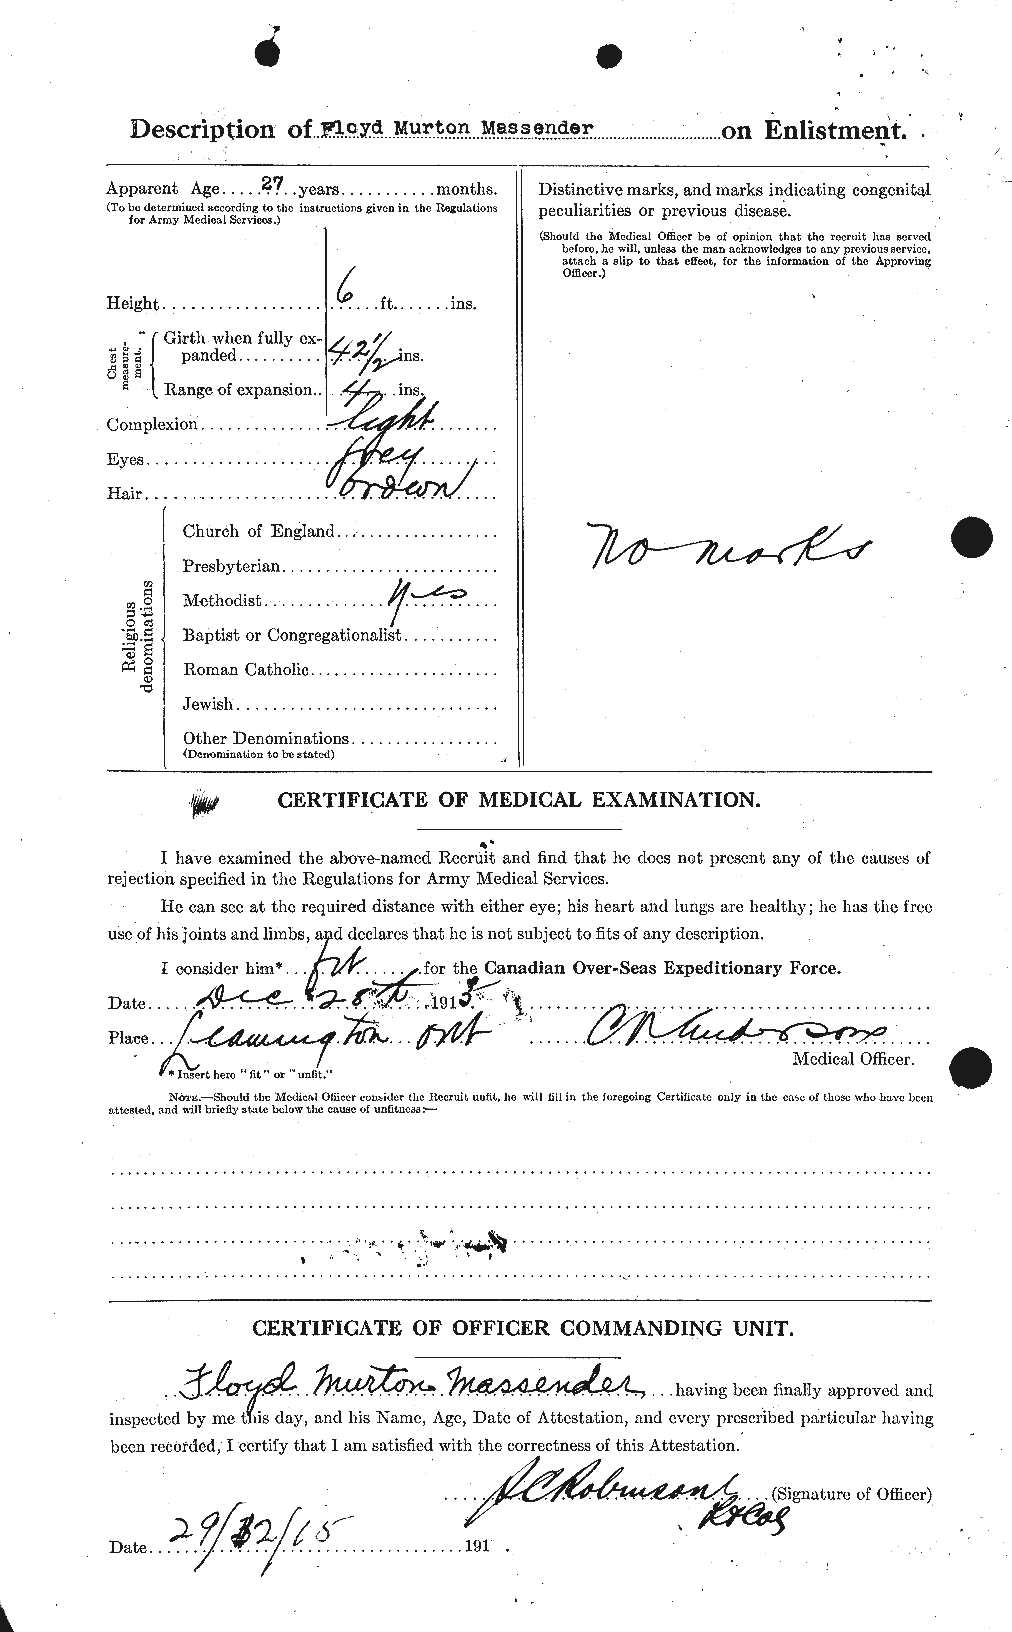 Personnel Records of the First World War - CEF 487003b